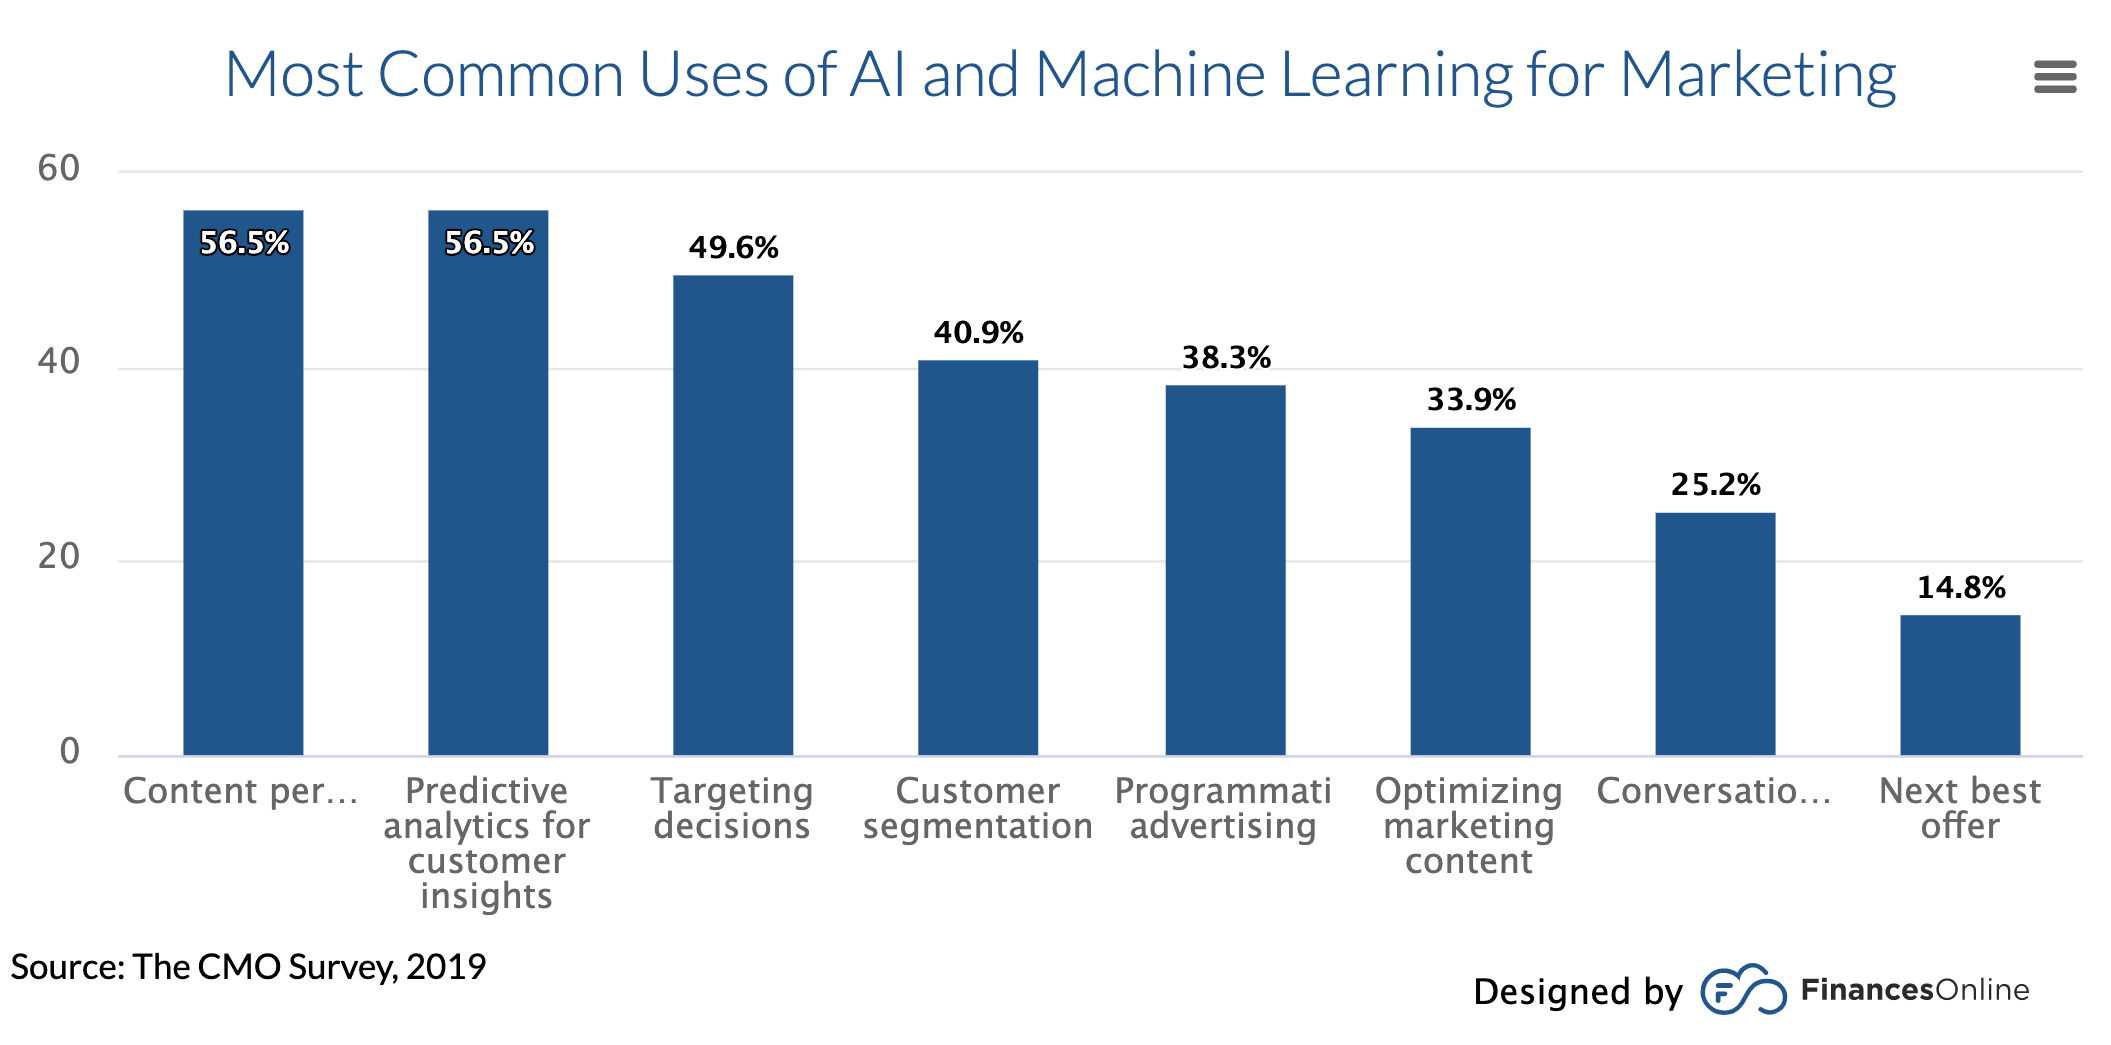 A bar graph of the most common uses of machine learning in marketing